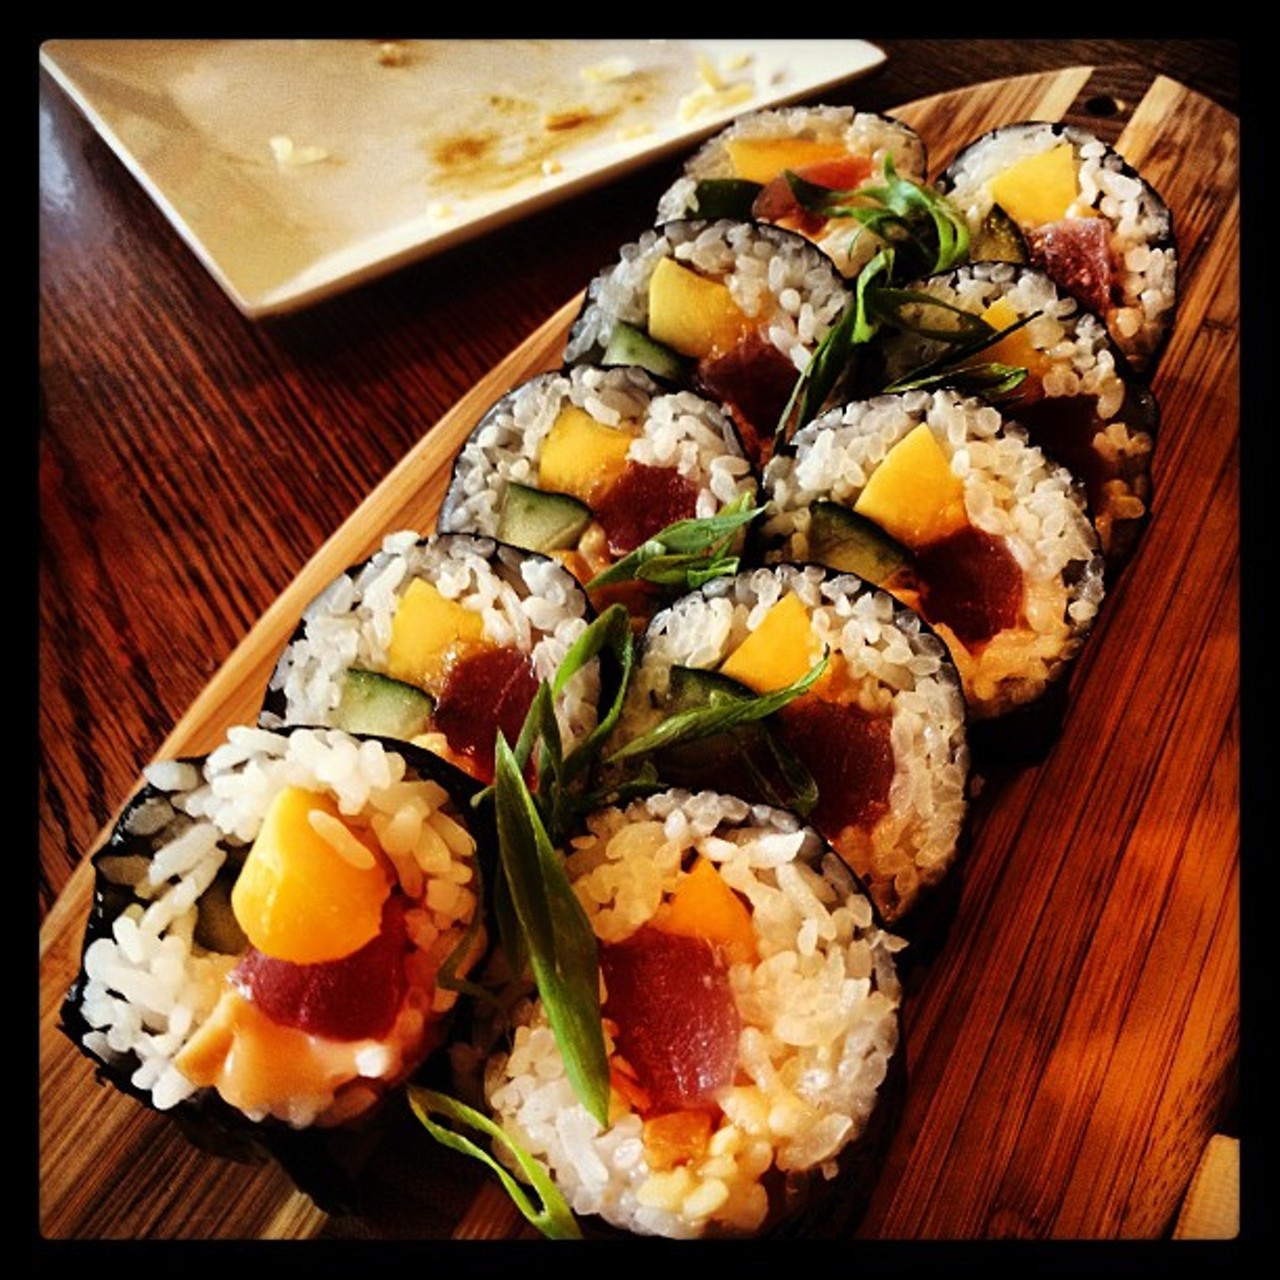 Sushi Rock still has the best sushi happy hour with their Tsunami Night. Every Thursday, almost every sushi roll is half price.